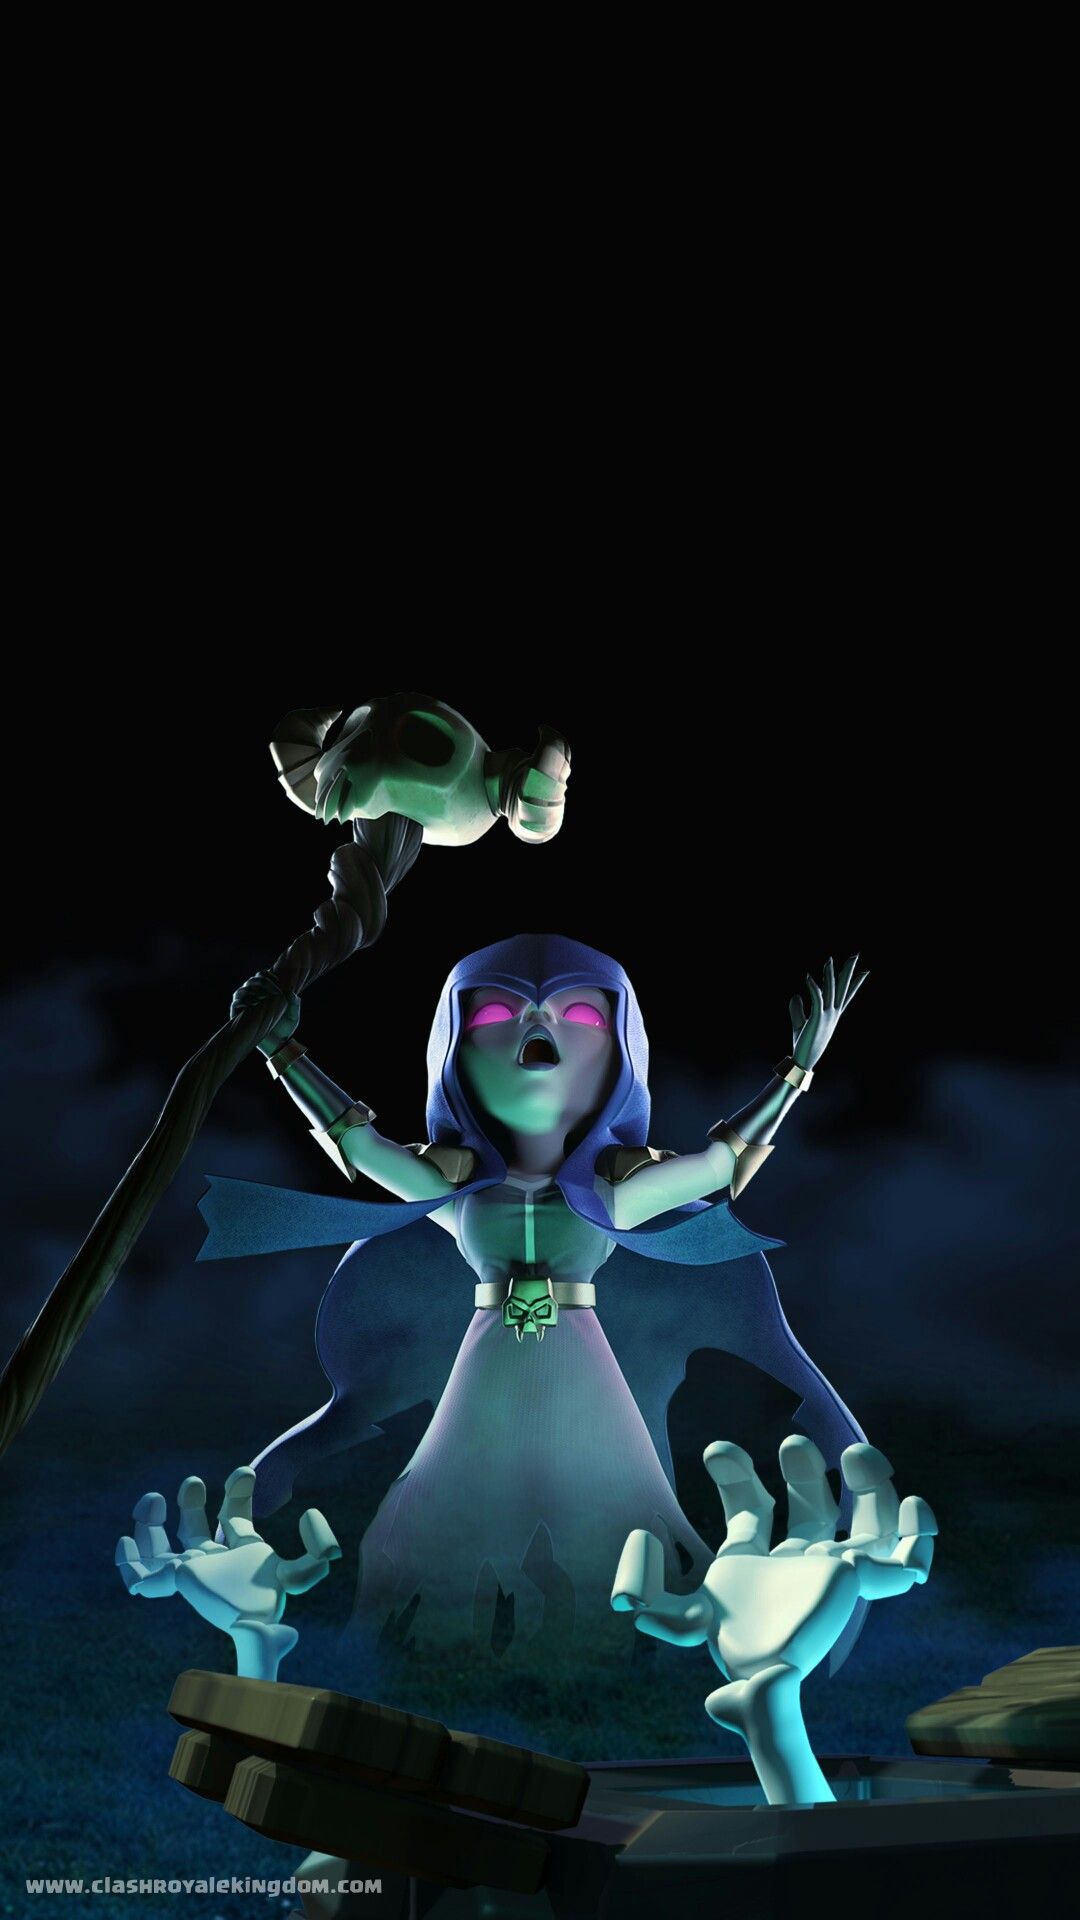 witch summons follow me before save. Clash royale wallpaper, Clash royale, Clash of clans